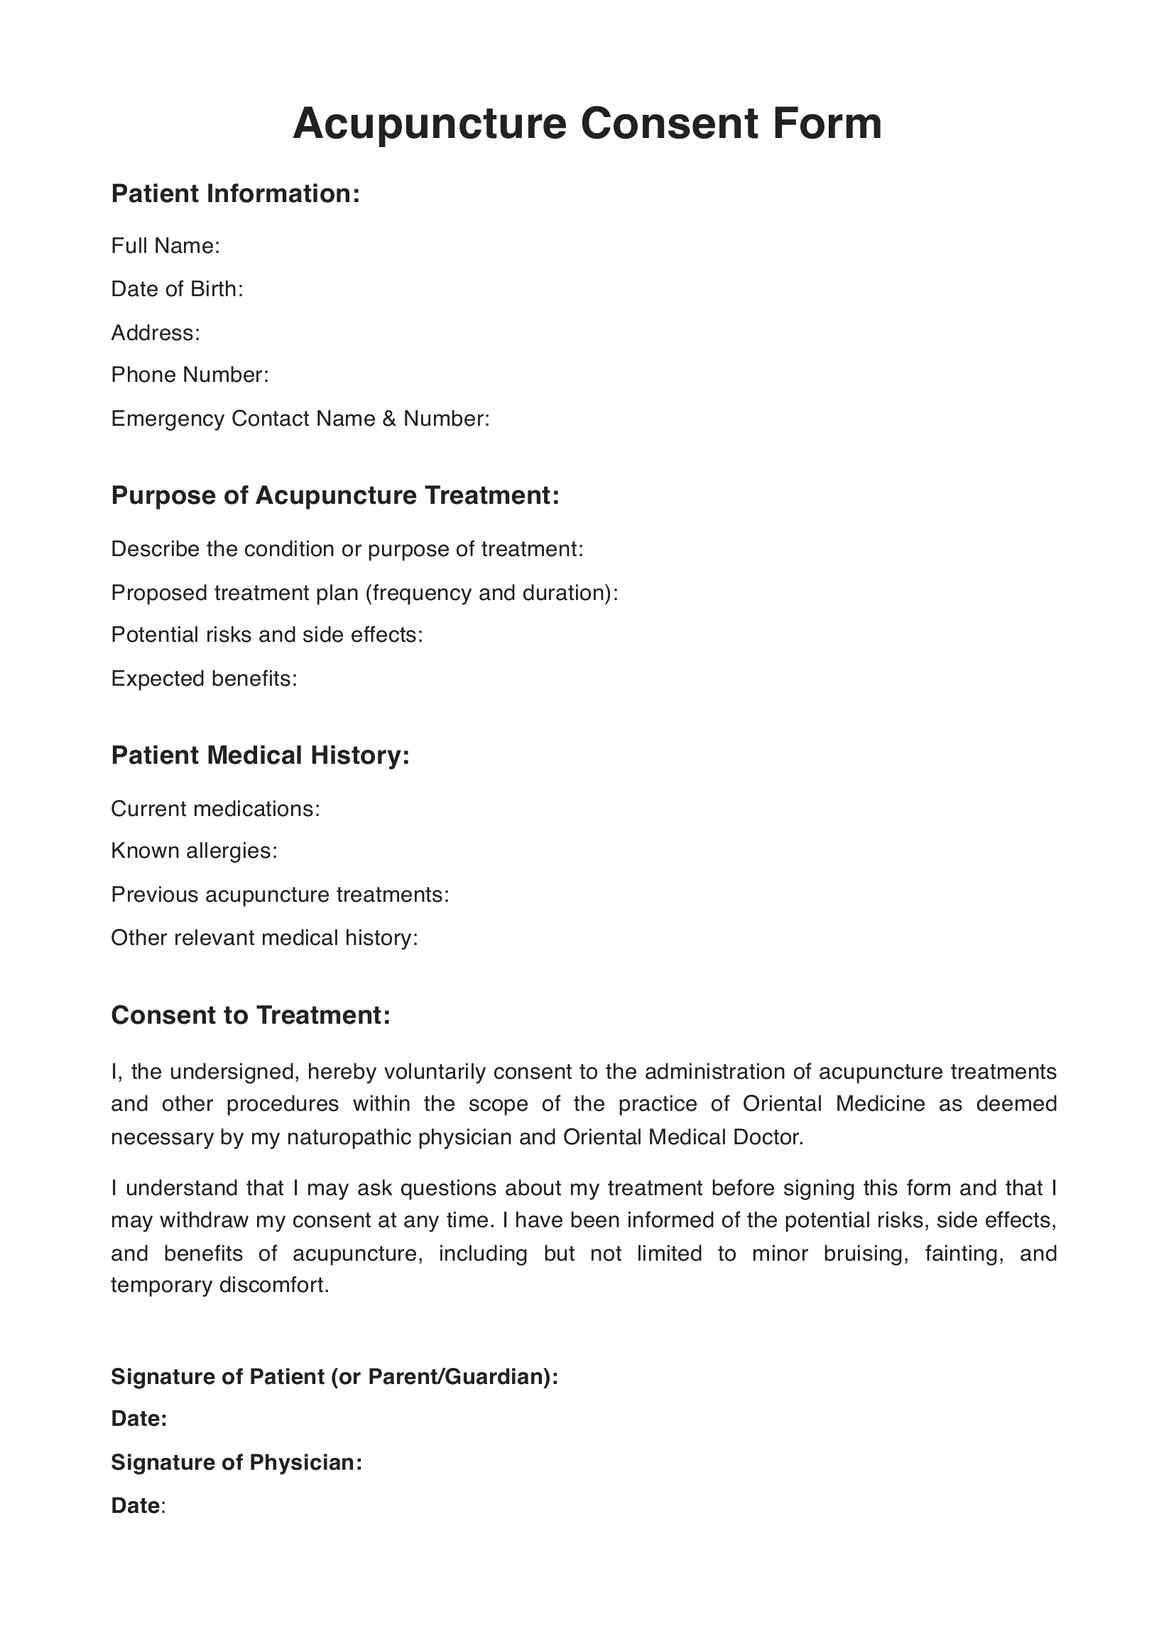 Acupuncture Consent Forms PDF Example